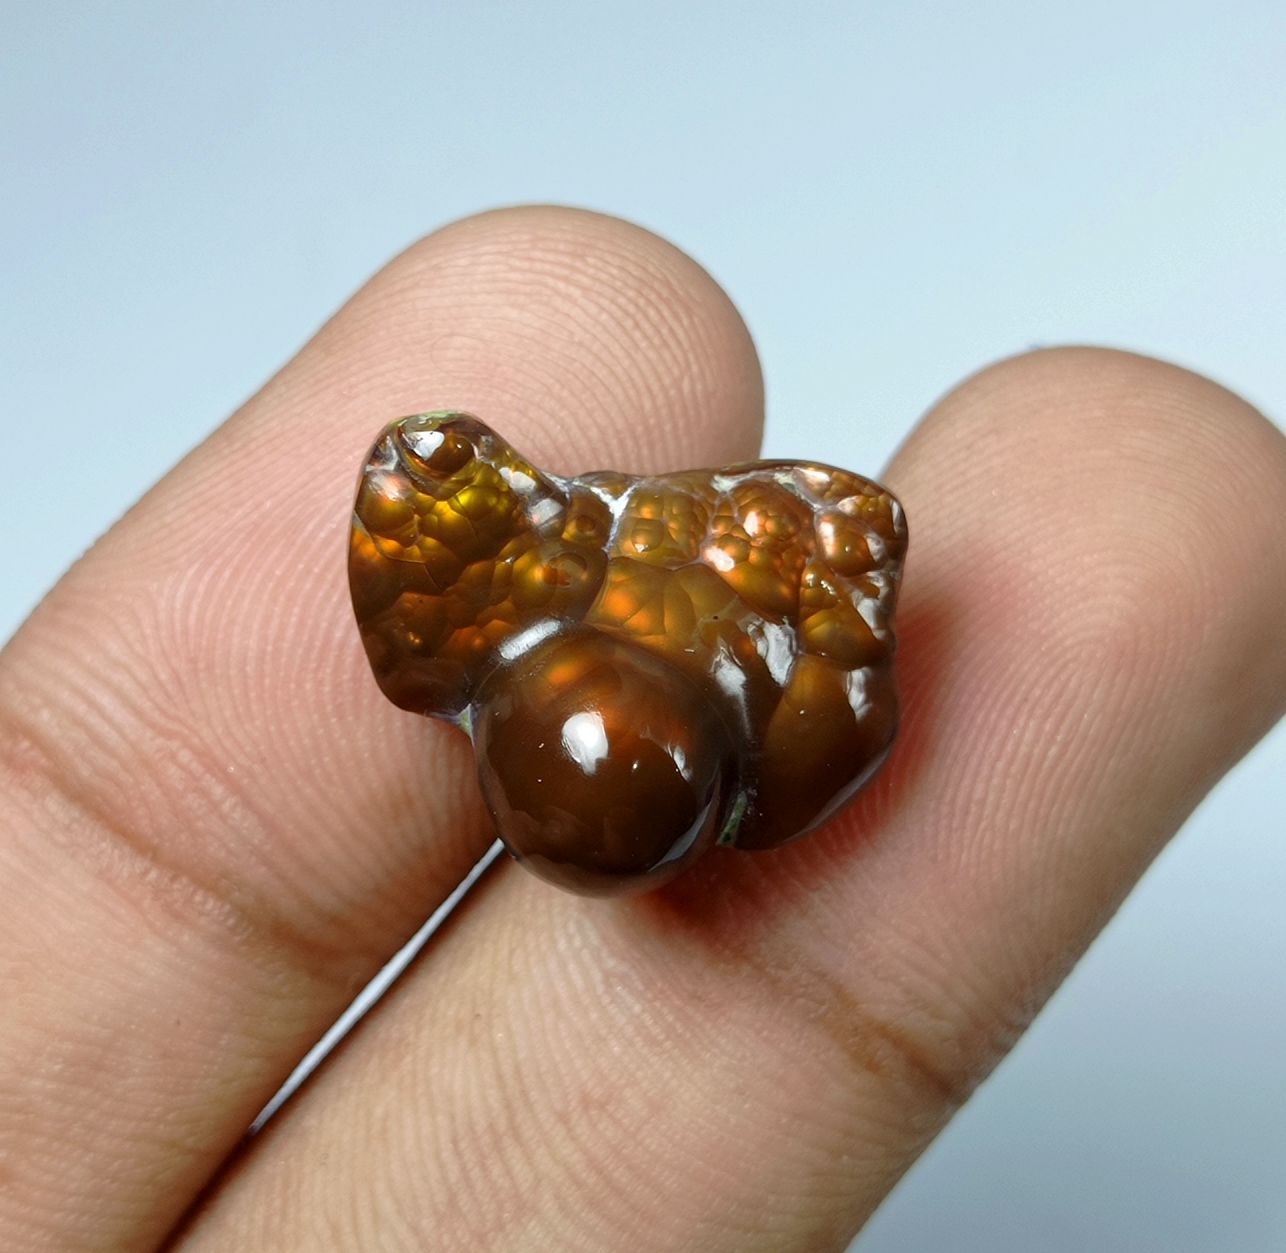 12.2ct Natural Mexican Fire Agate Gemstone - Dimensions 20x15x9mm